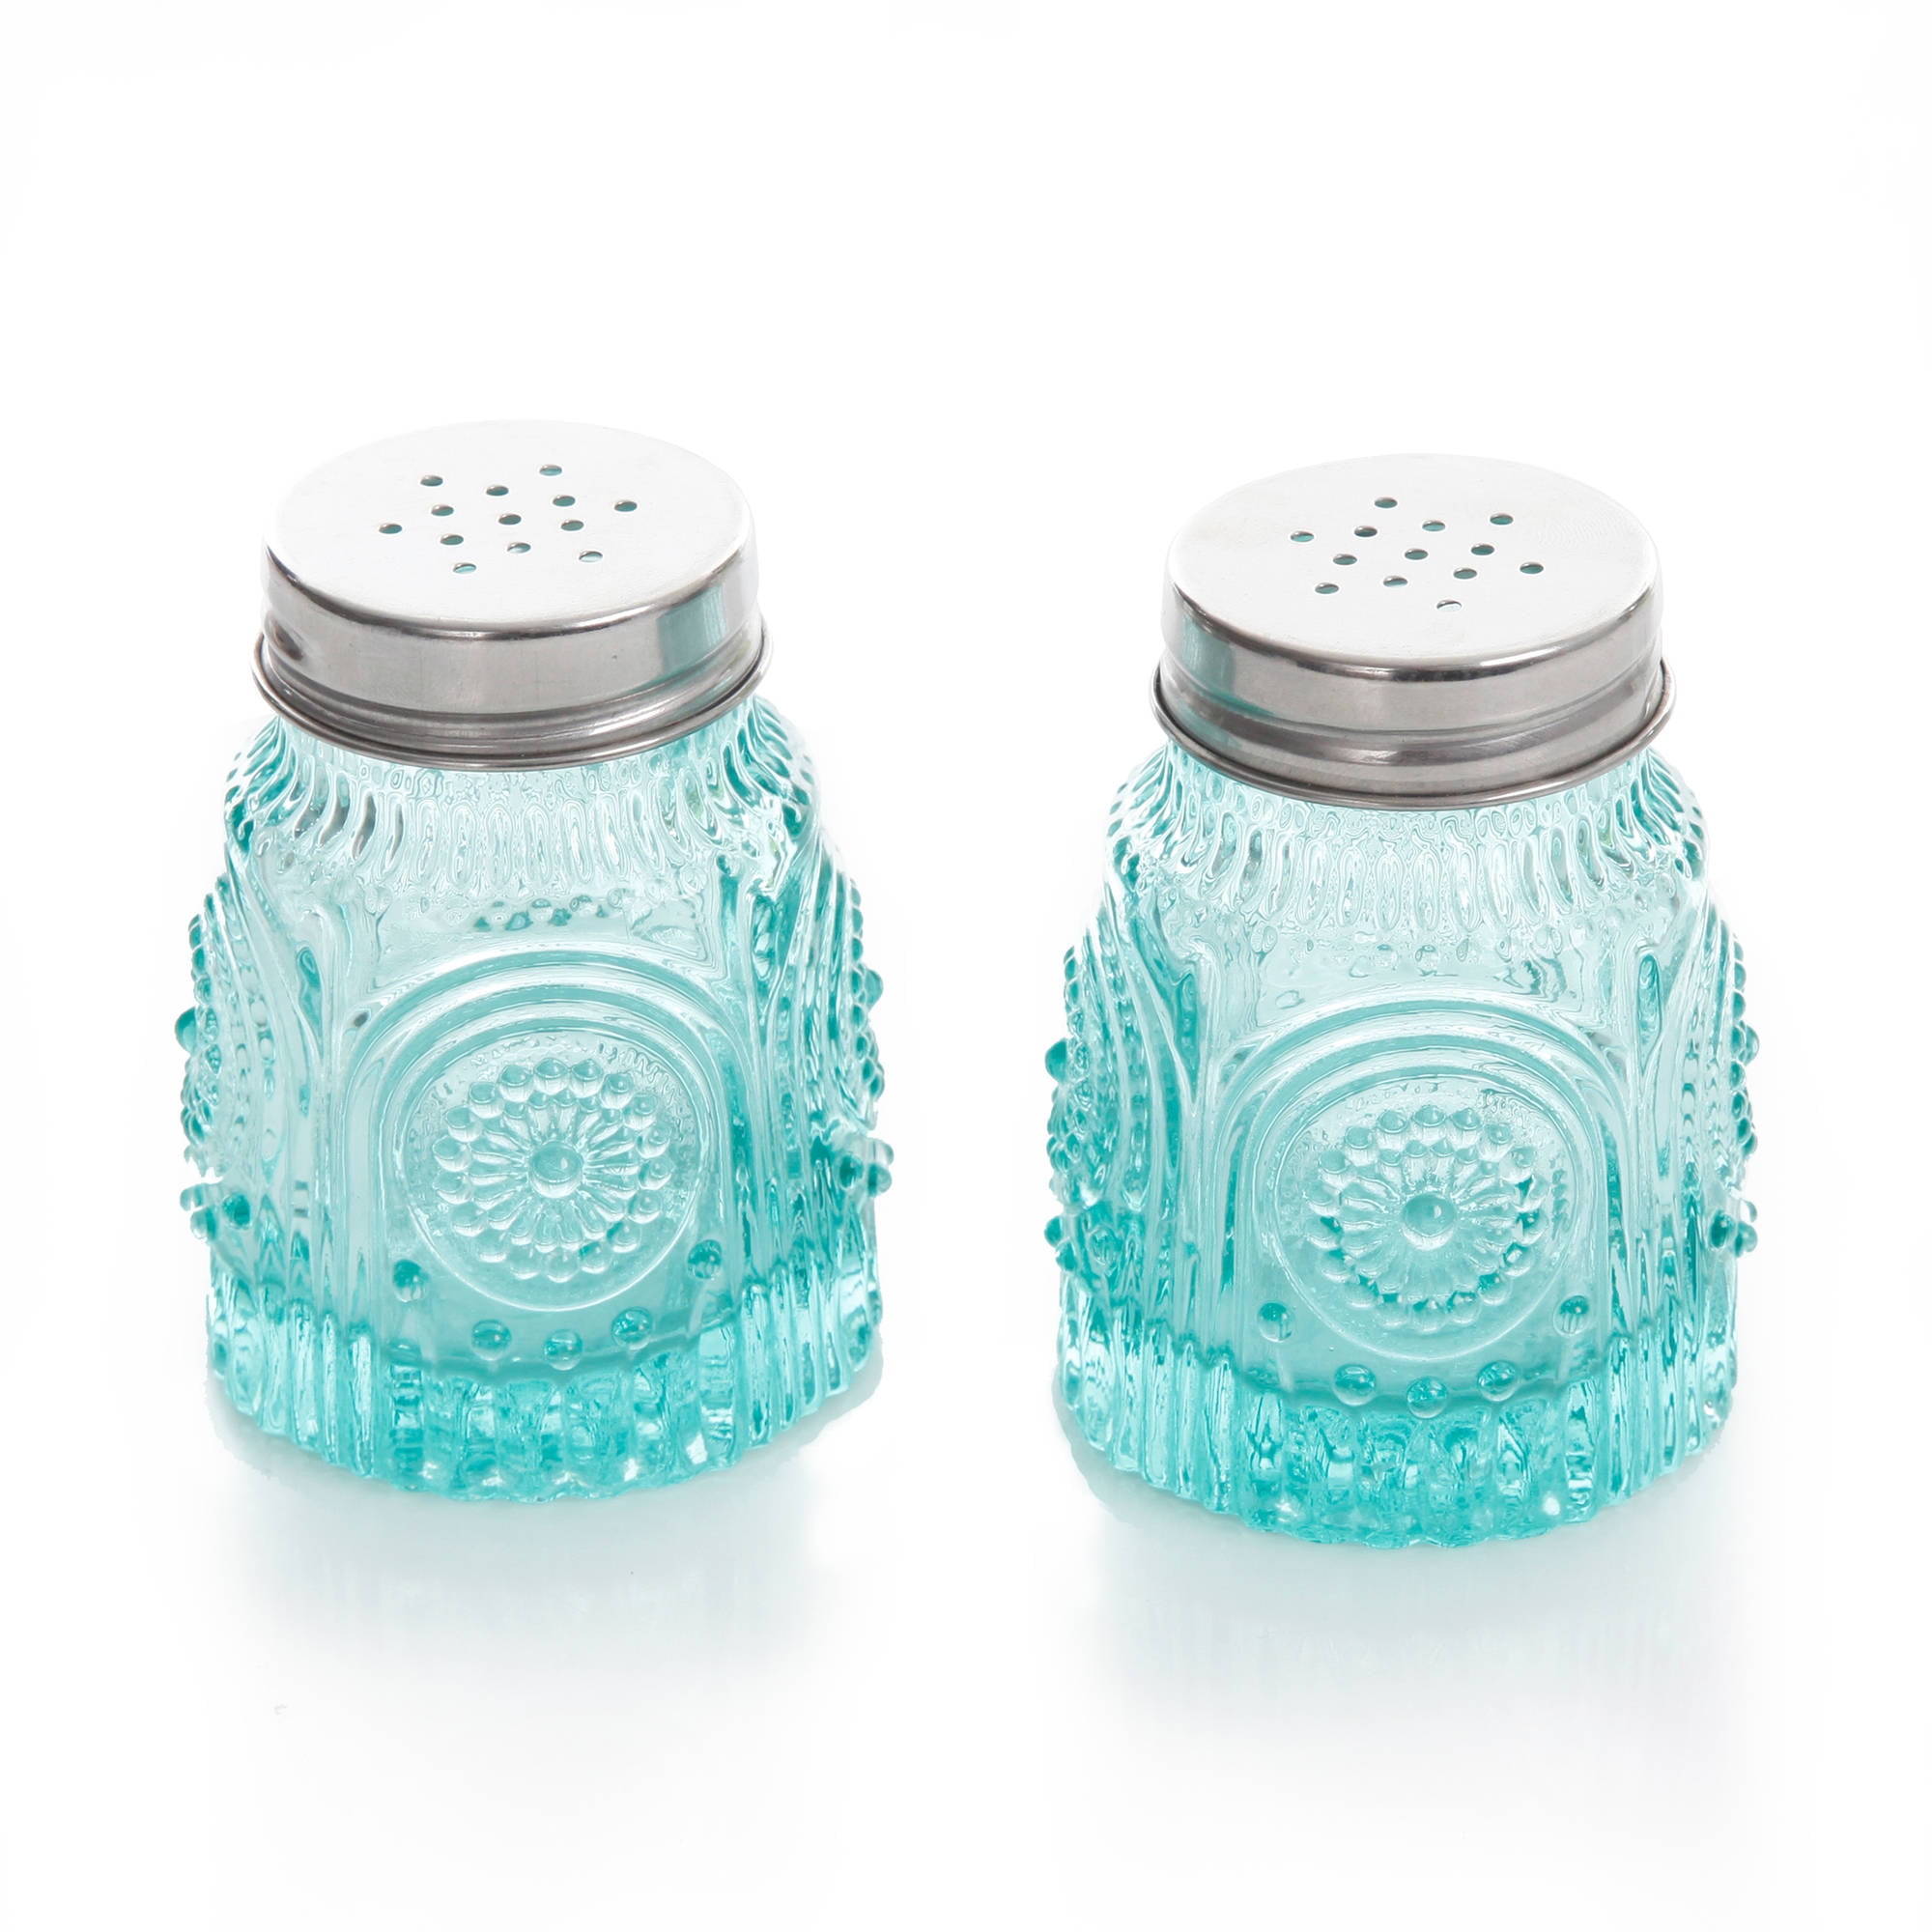 Savannah Turquoise Salt & Pepper Shakers - 2 1/4W x 2 1/4D x 3 1/2H from Lone Star Western Decor